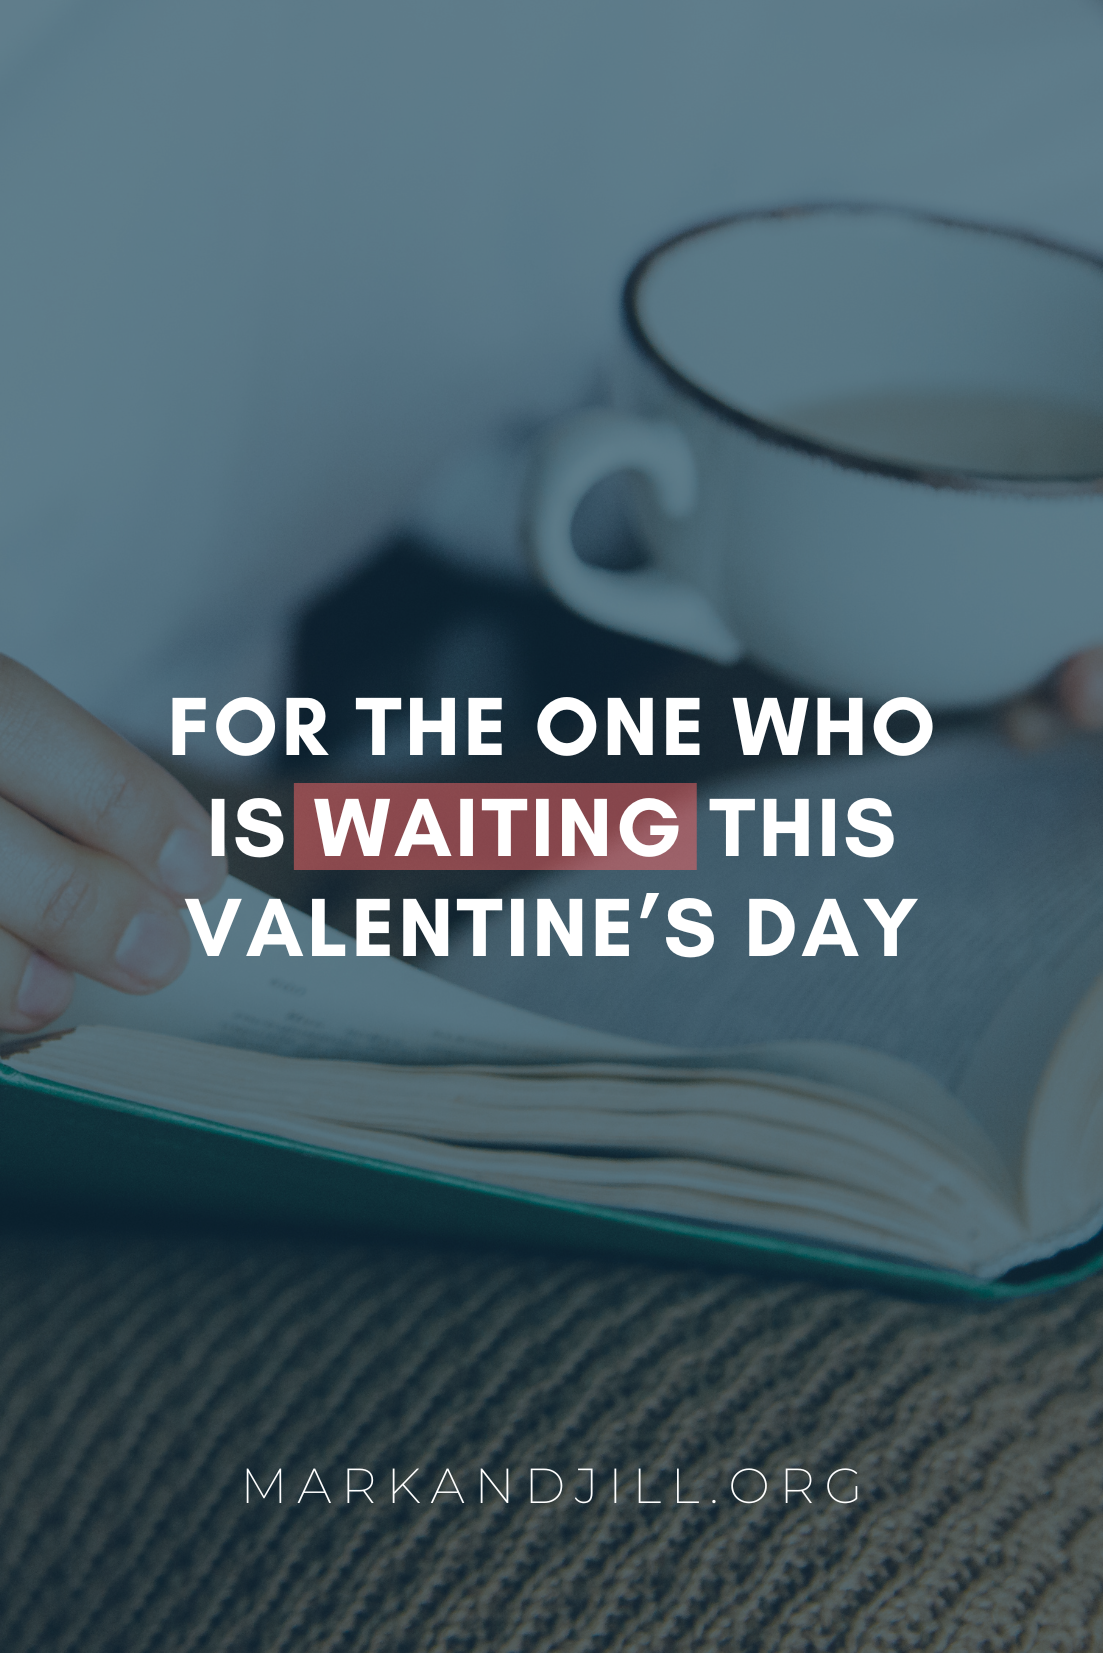 For the One Who is Waiting This Valentine’s Day